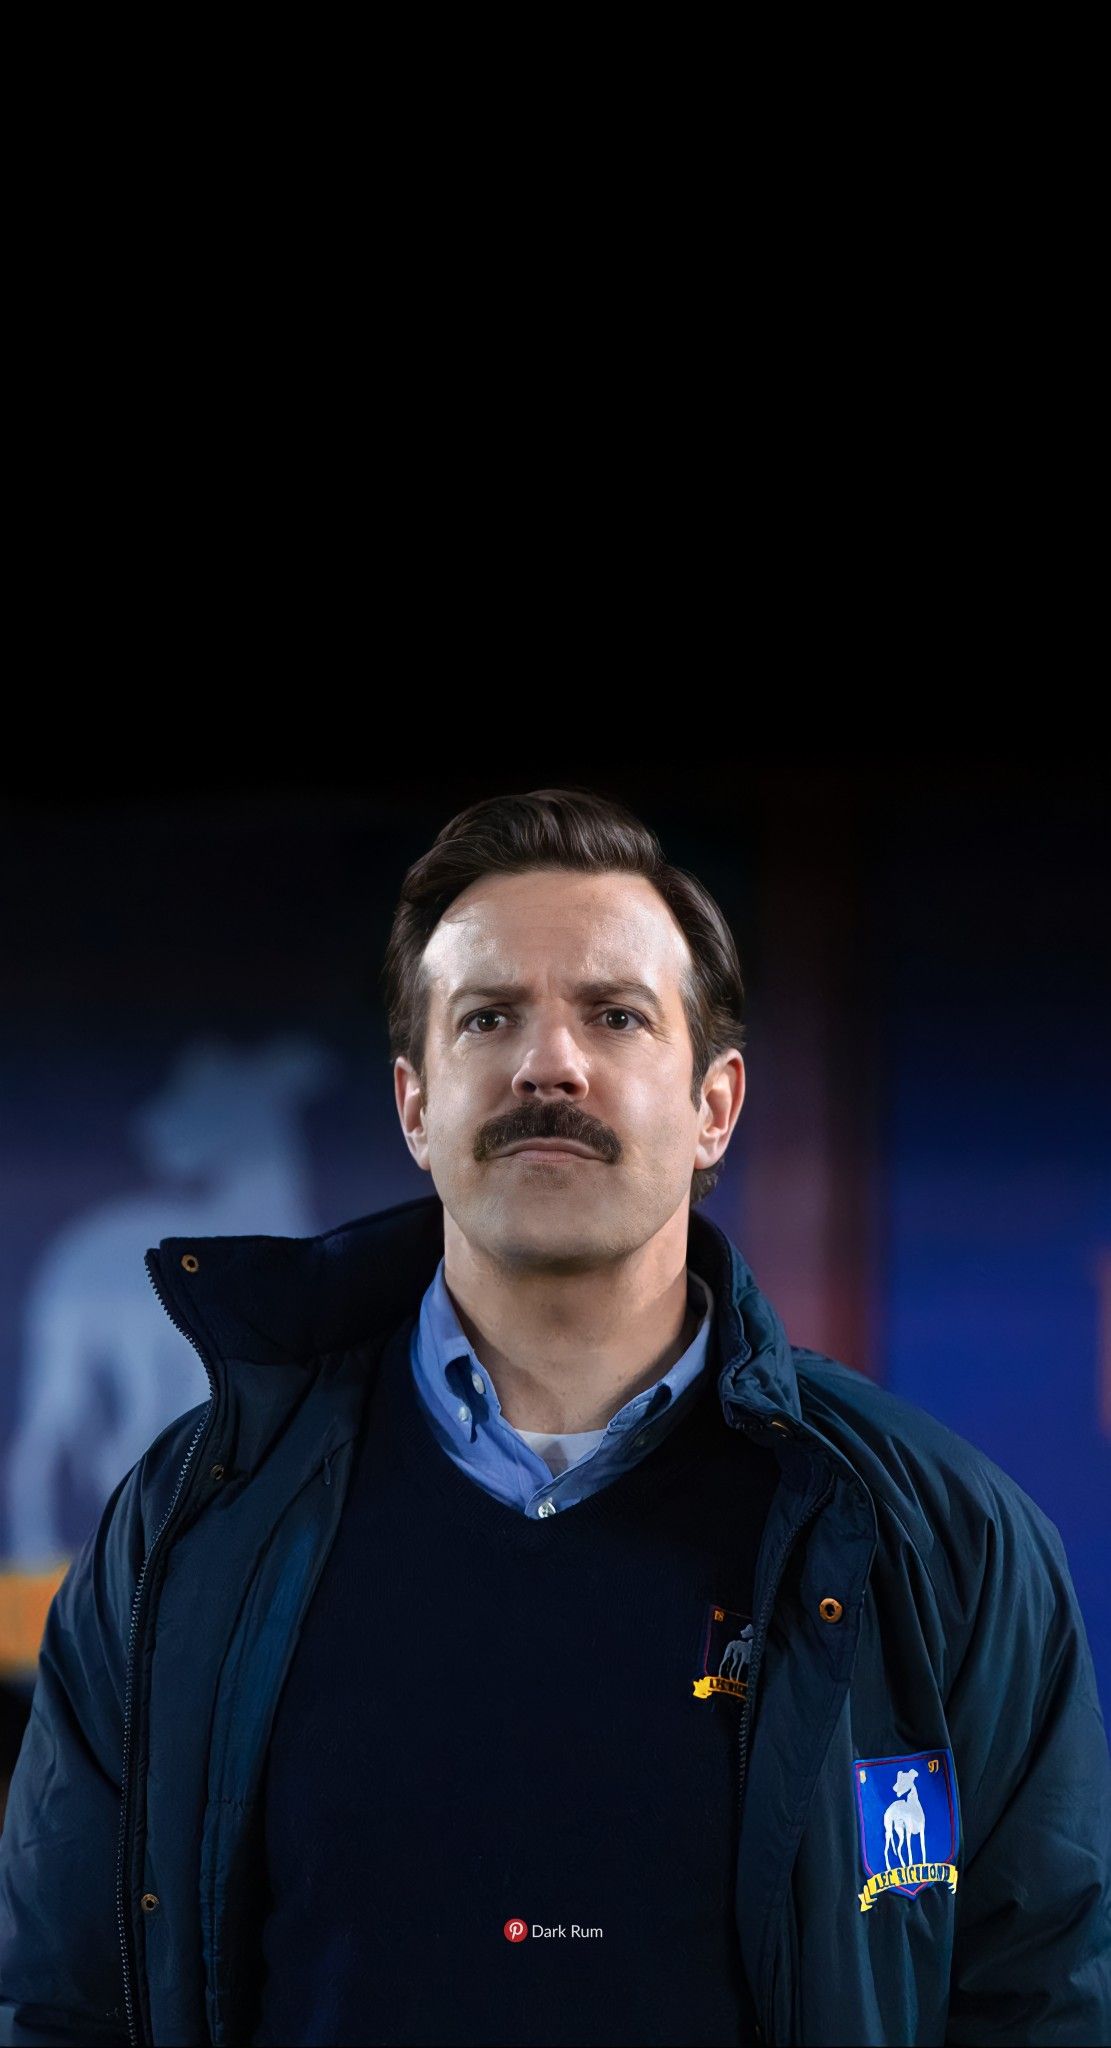 Ted Lasso Wallpapers